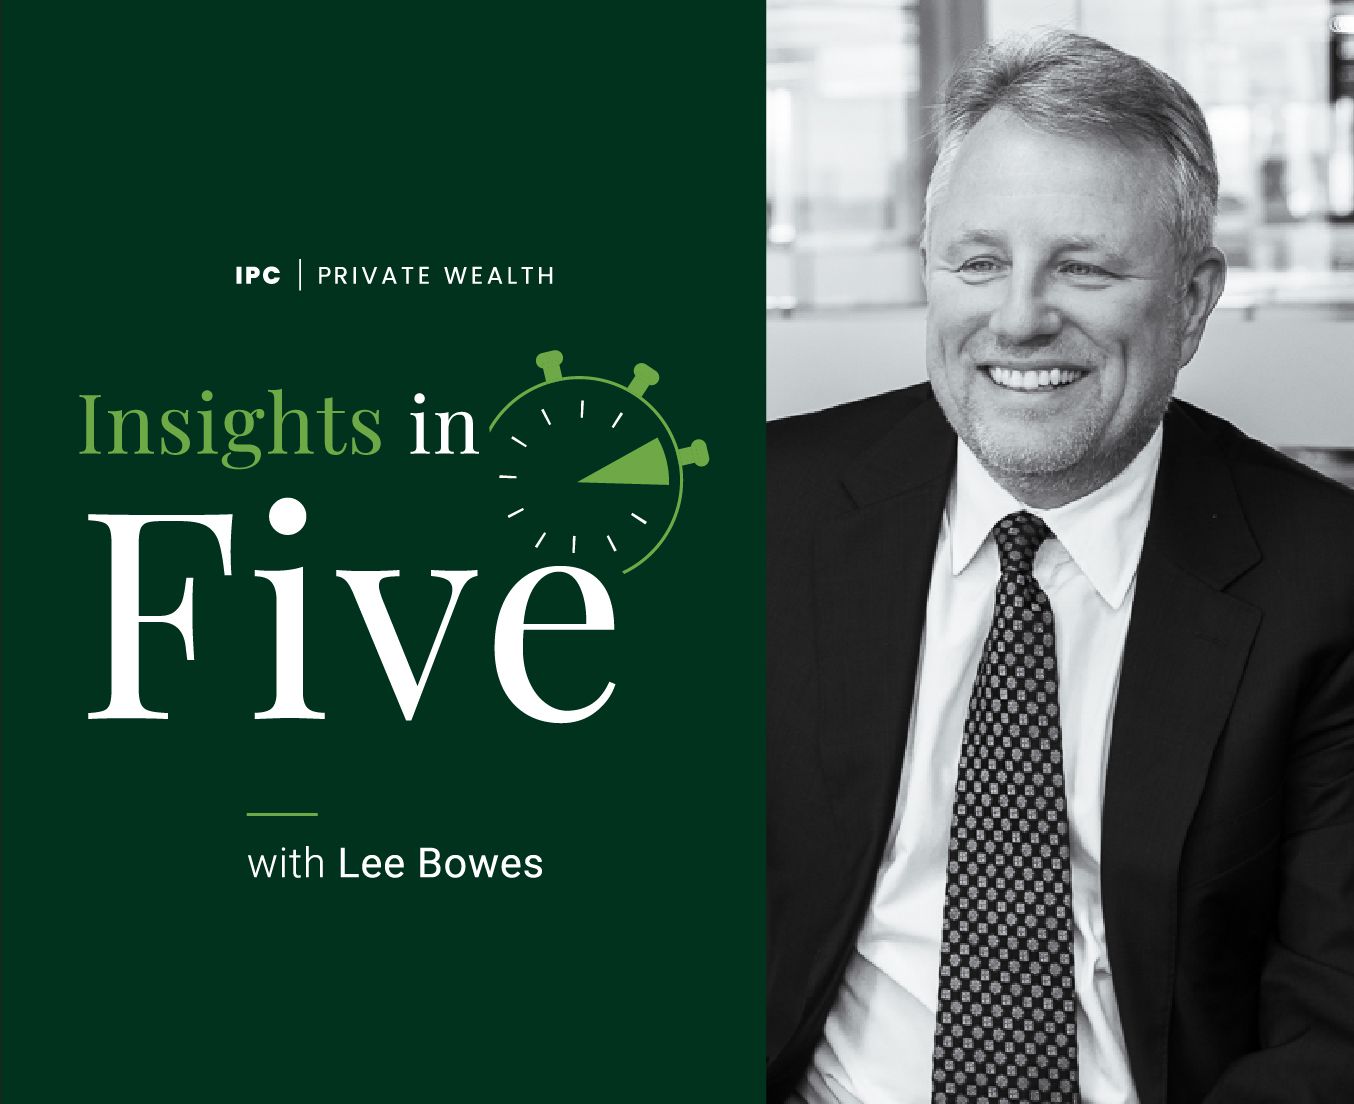 The third week of February marked a crucial period for IPC Private Wealth clients. 